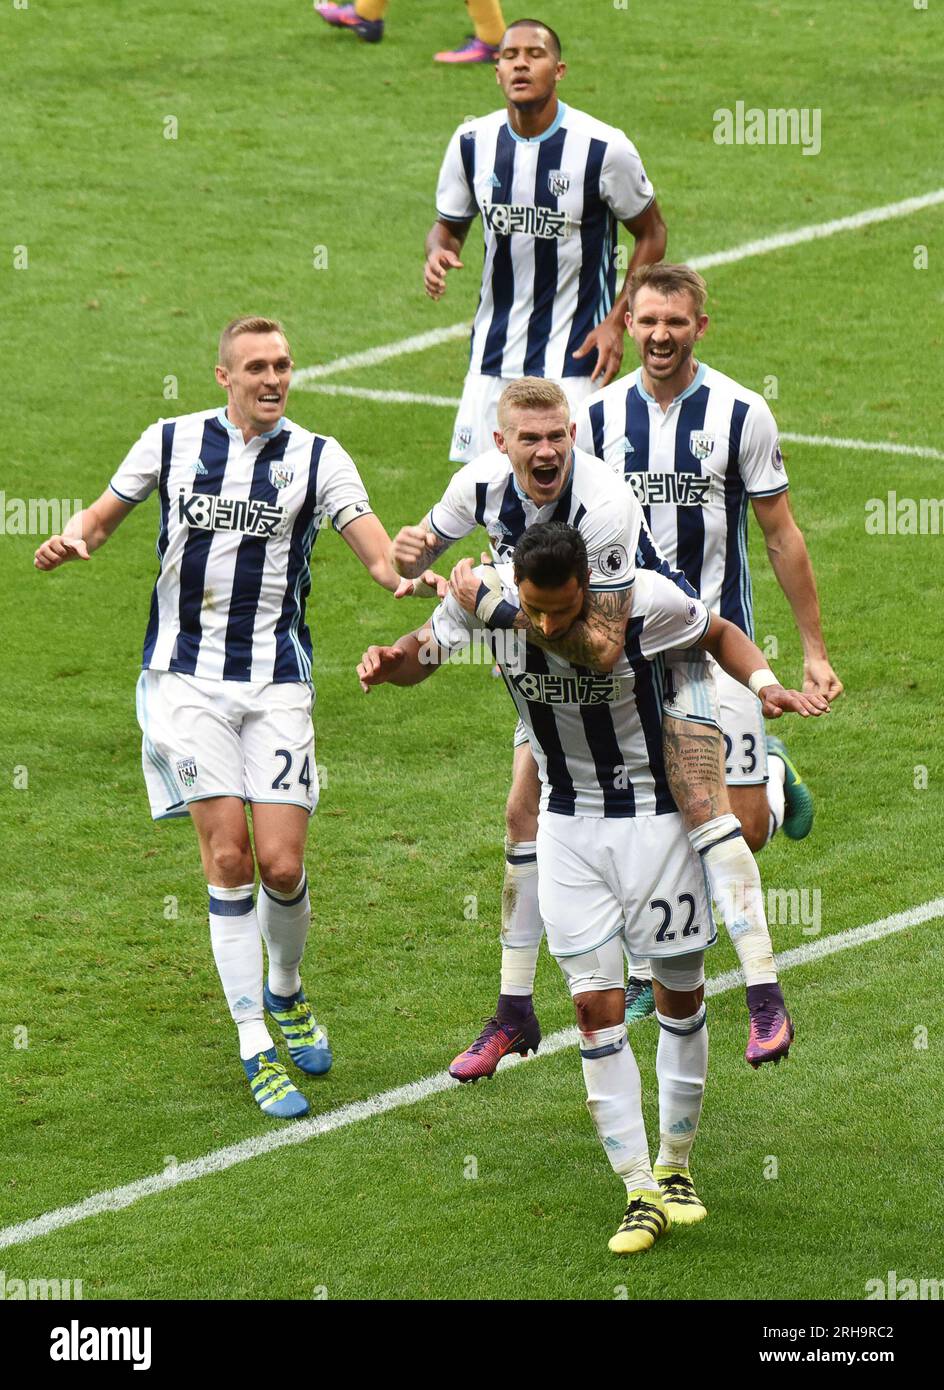 Nacer Chadli of West Bromwich celebrates after scoring a goal to make it 1-0 Premier League - West Bromwich Albion v Tottenham Hotspur 15/10/2016 Stock Photo